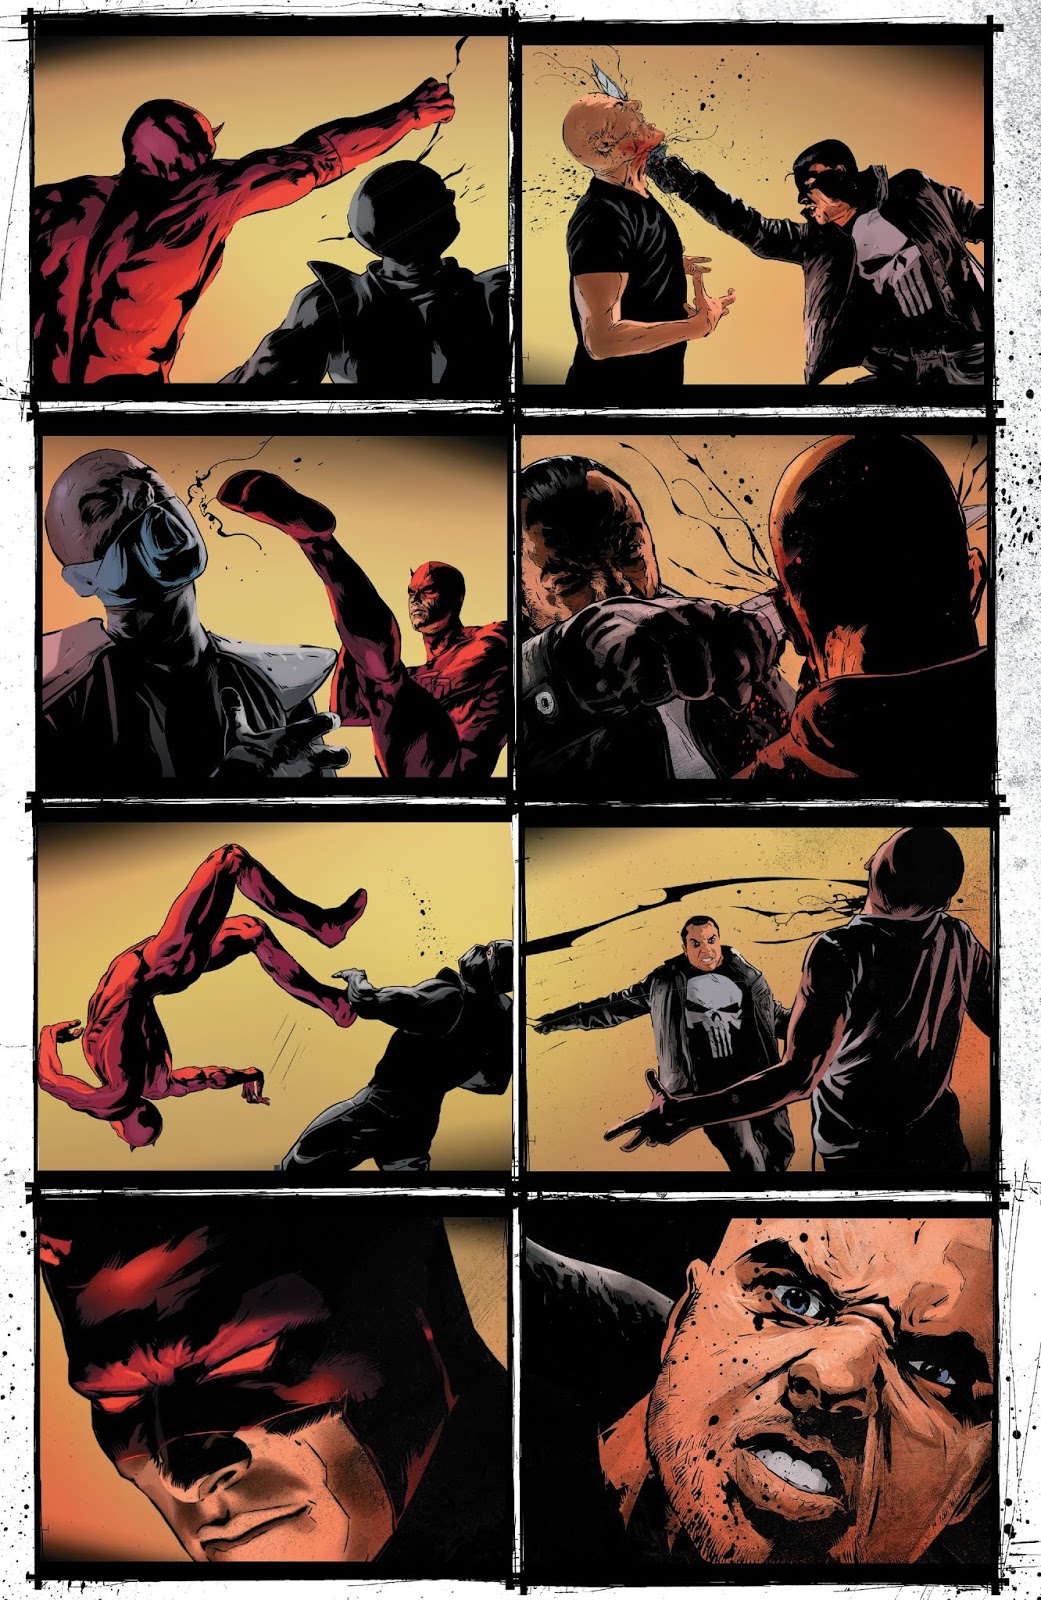 The Punisher And Daredevil Team Up (The Punisher Vol. 12 #2)